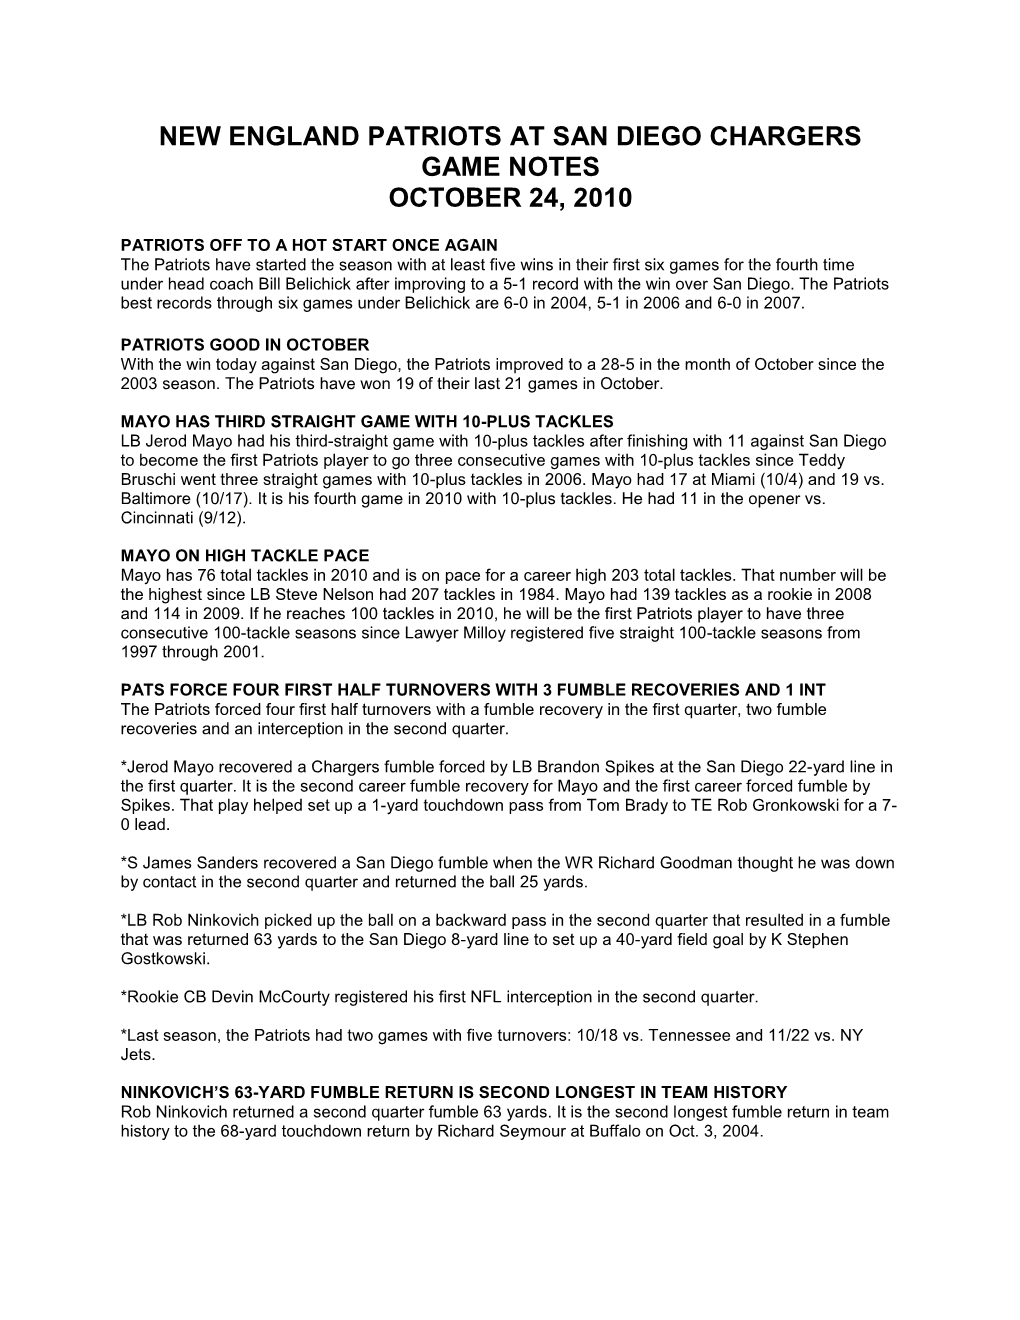 New England Patriots at San Diego Chargers Game Notes October 24, 2010